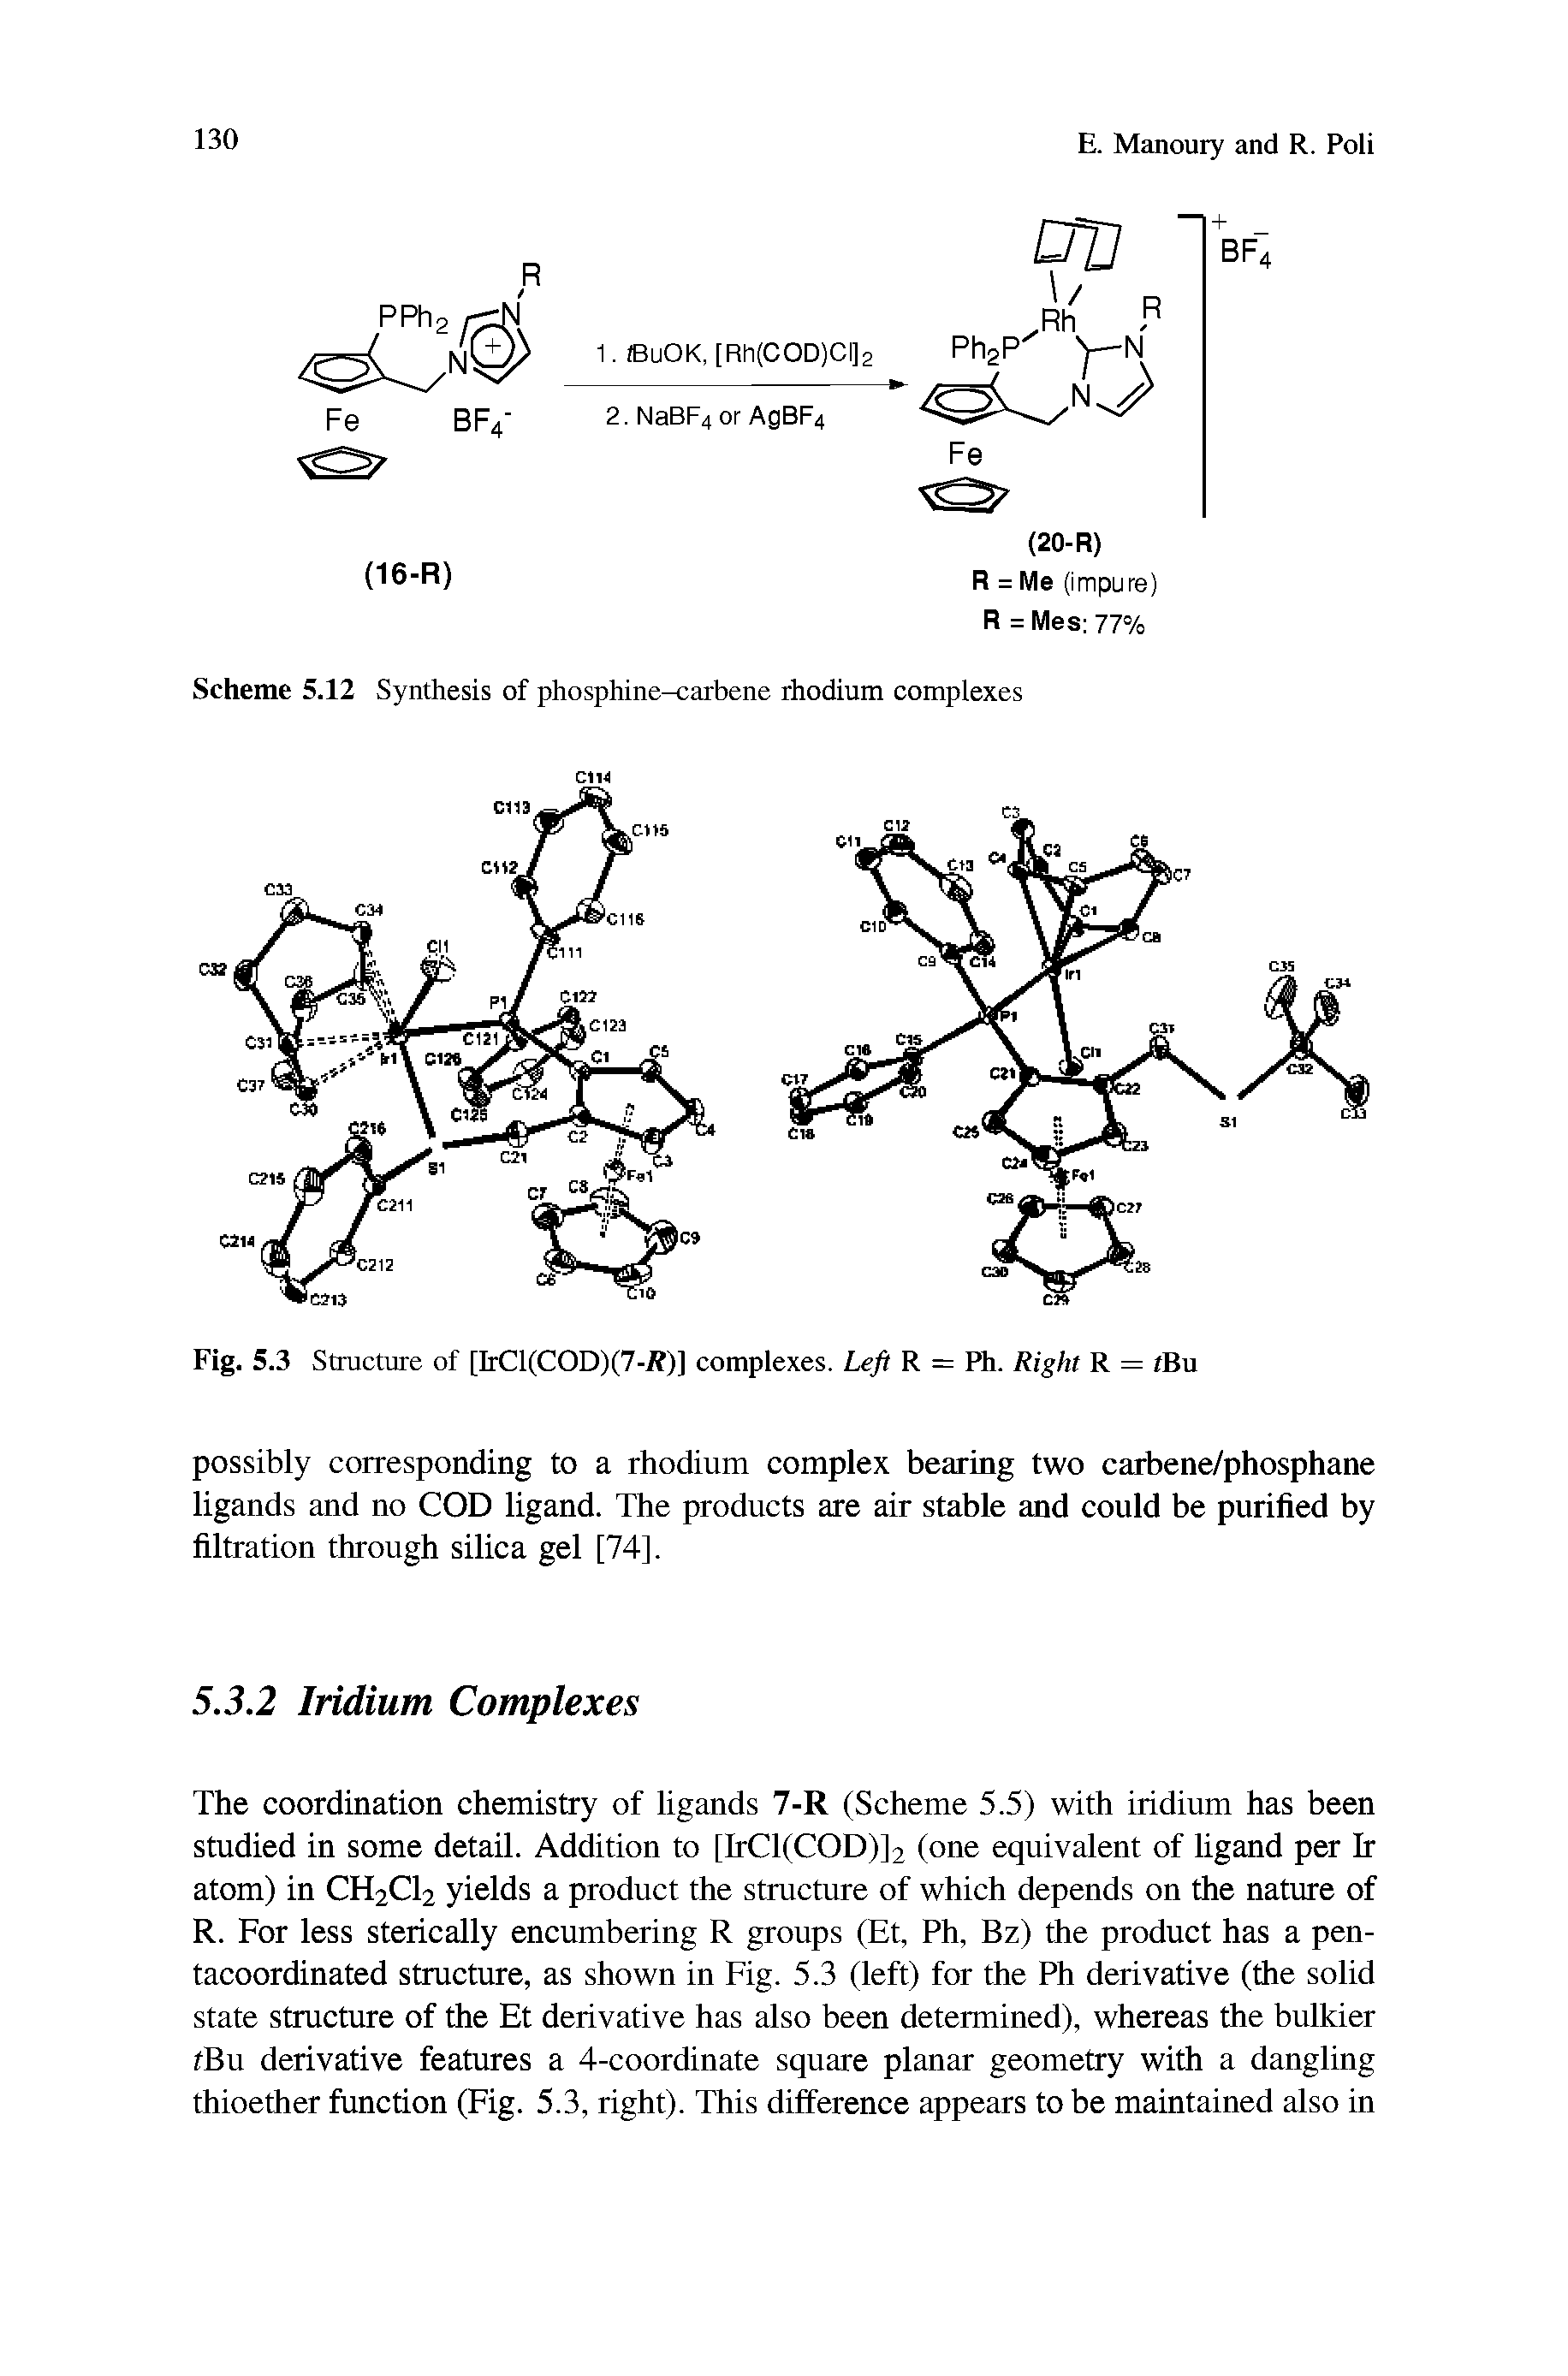 Scheme 5.12 Synthesis of phosphine-carbene rhodium complexes...